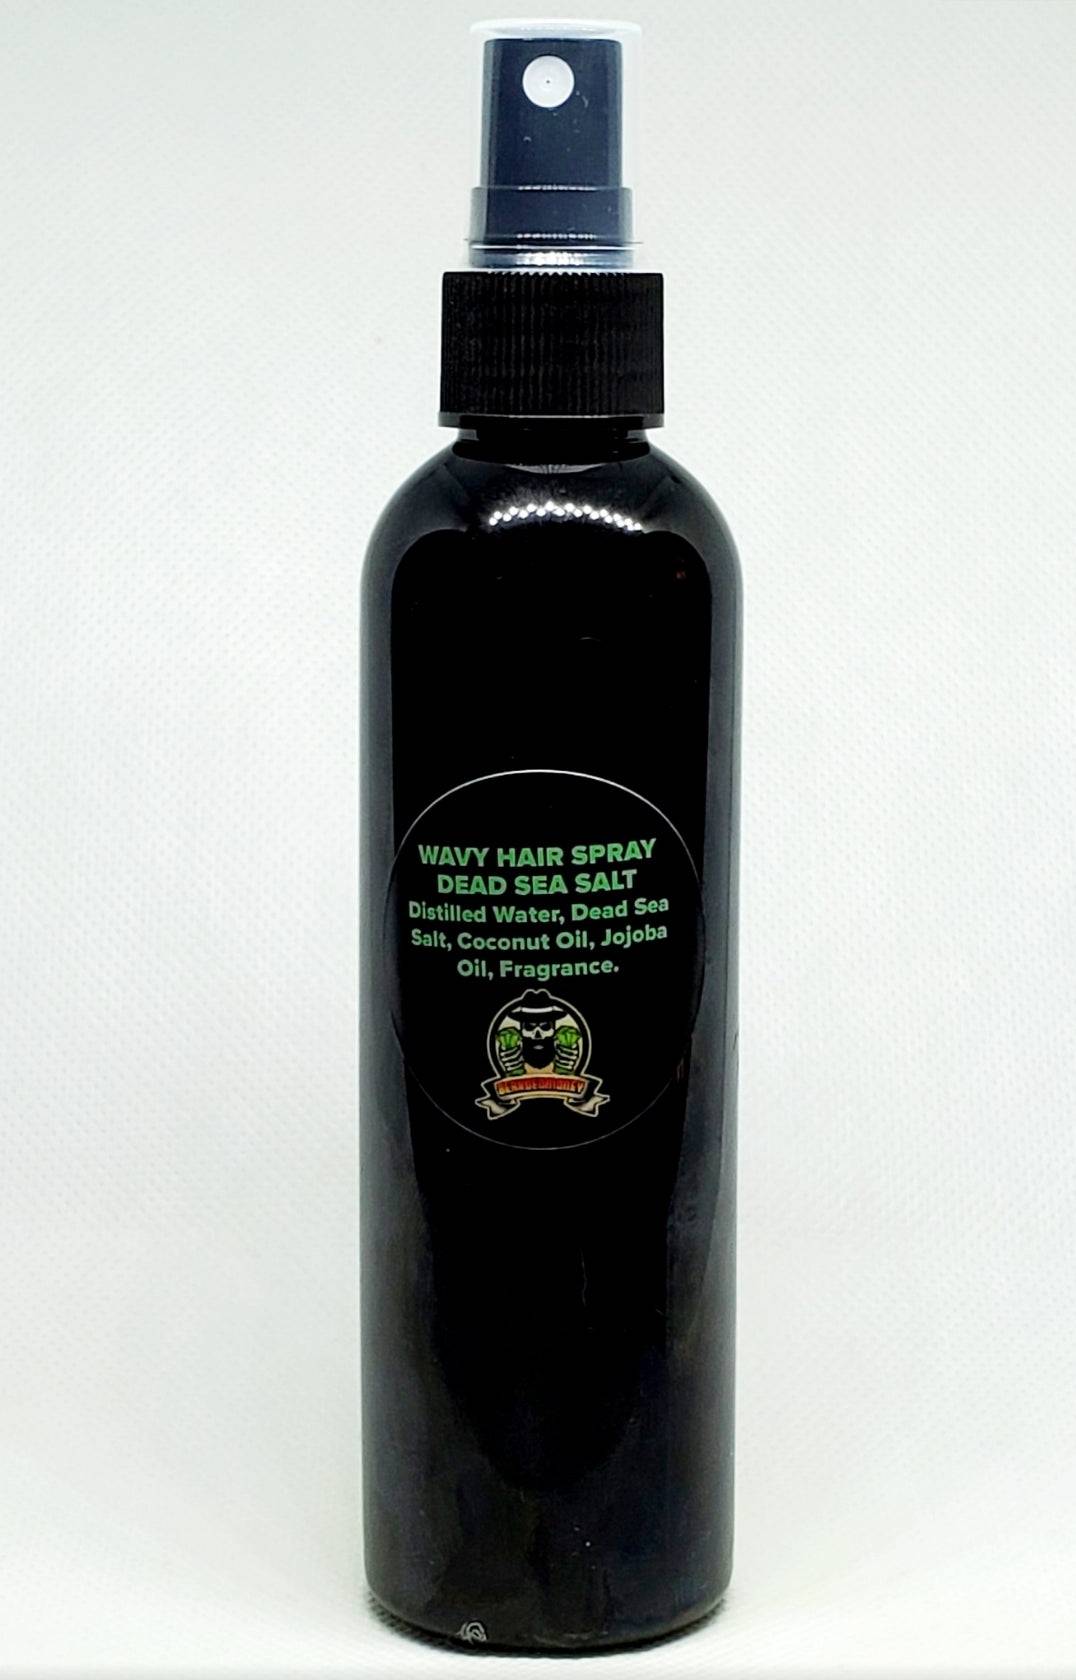 Sophisticated Wavy Hair Spray has a captivating scent for the sophisticated man. A citrusy, woodsy masculine fragrance with notes of lime and rose.